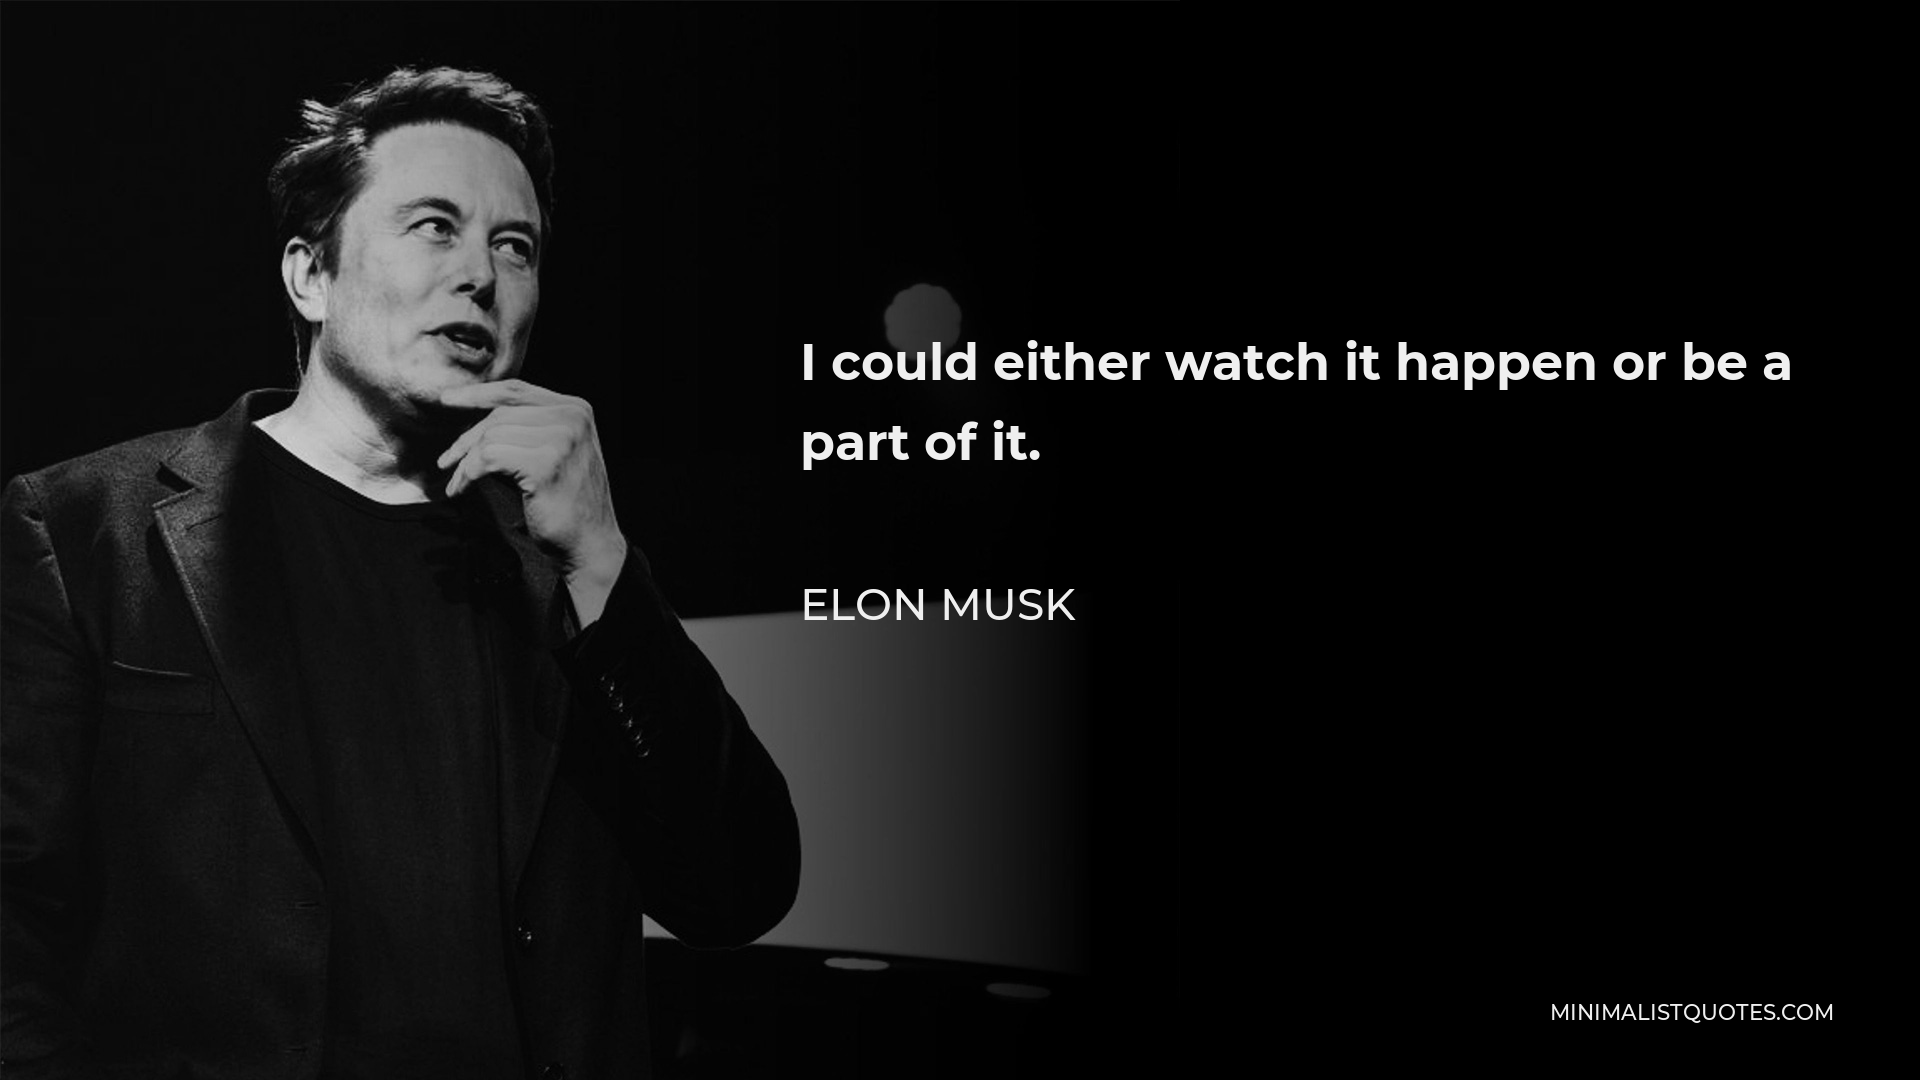 Elon Musk Quote - I could either watch it happen or be a part of it.